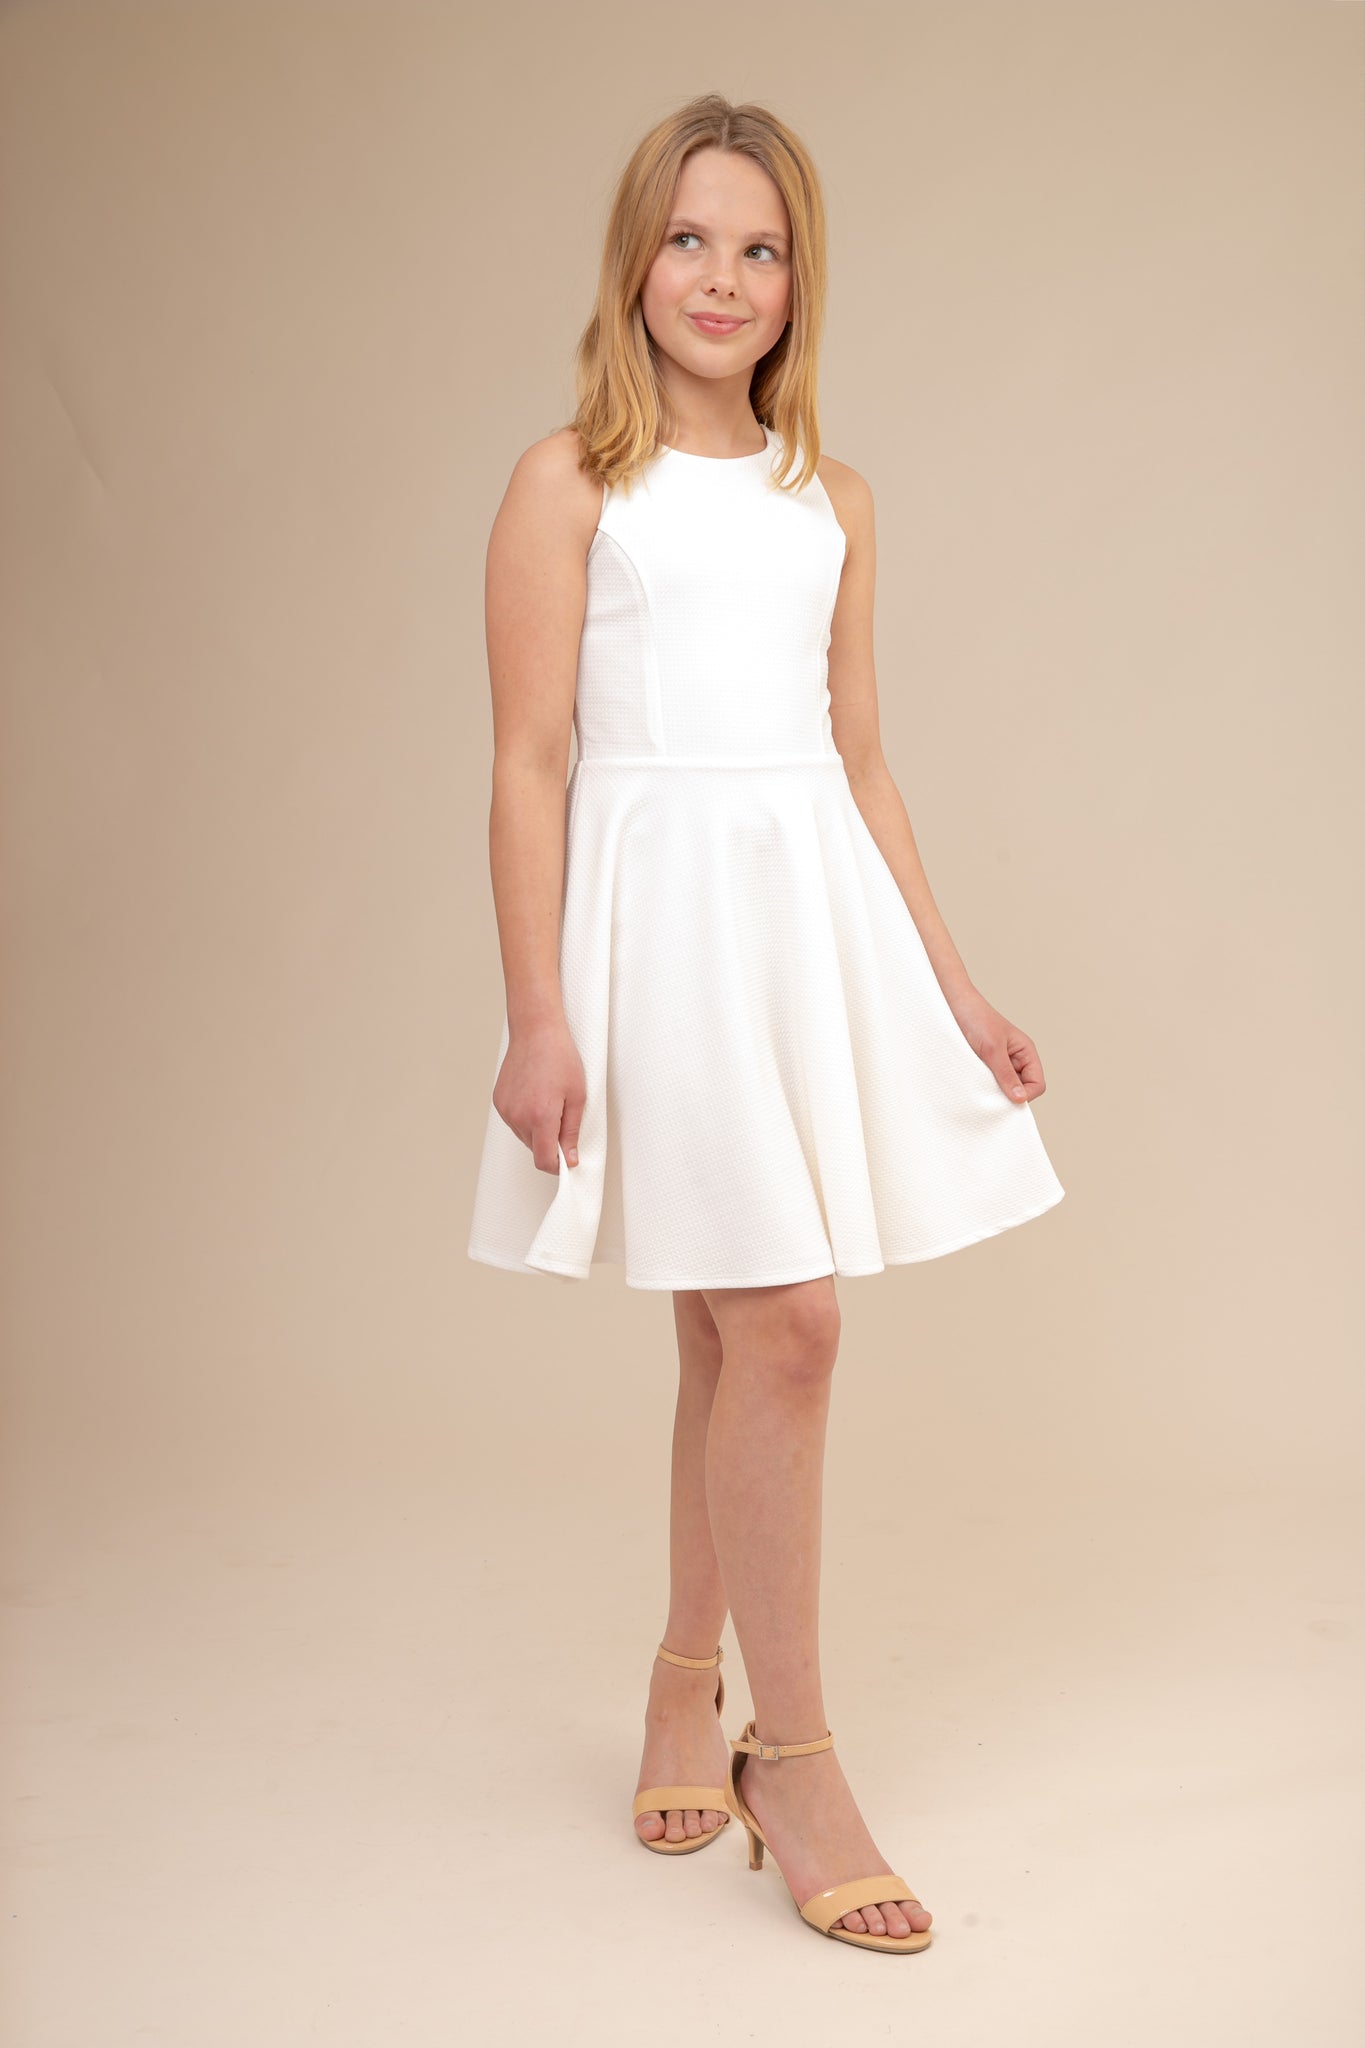 The tank style sleeve textured fit and flare dress is shown in ivory with high neck line, racerback detailing and dart bodice for a chic and sophisticated look. This dress can be worn to a more conservative special occasion event like cotillion, graduation, or religious service like a bat mitzvah service or church ceremony.